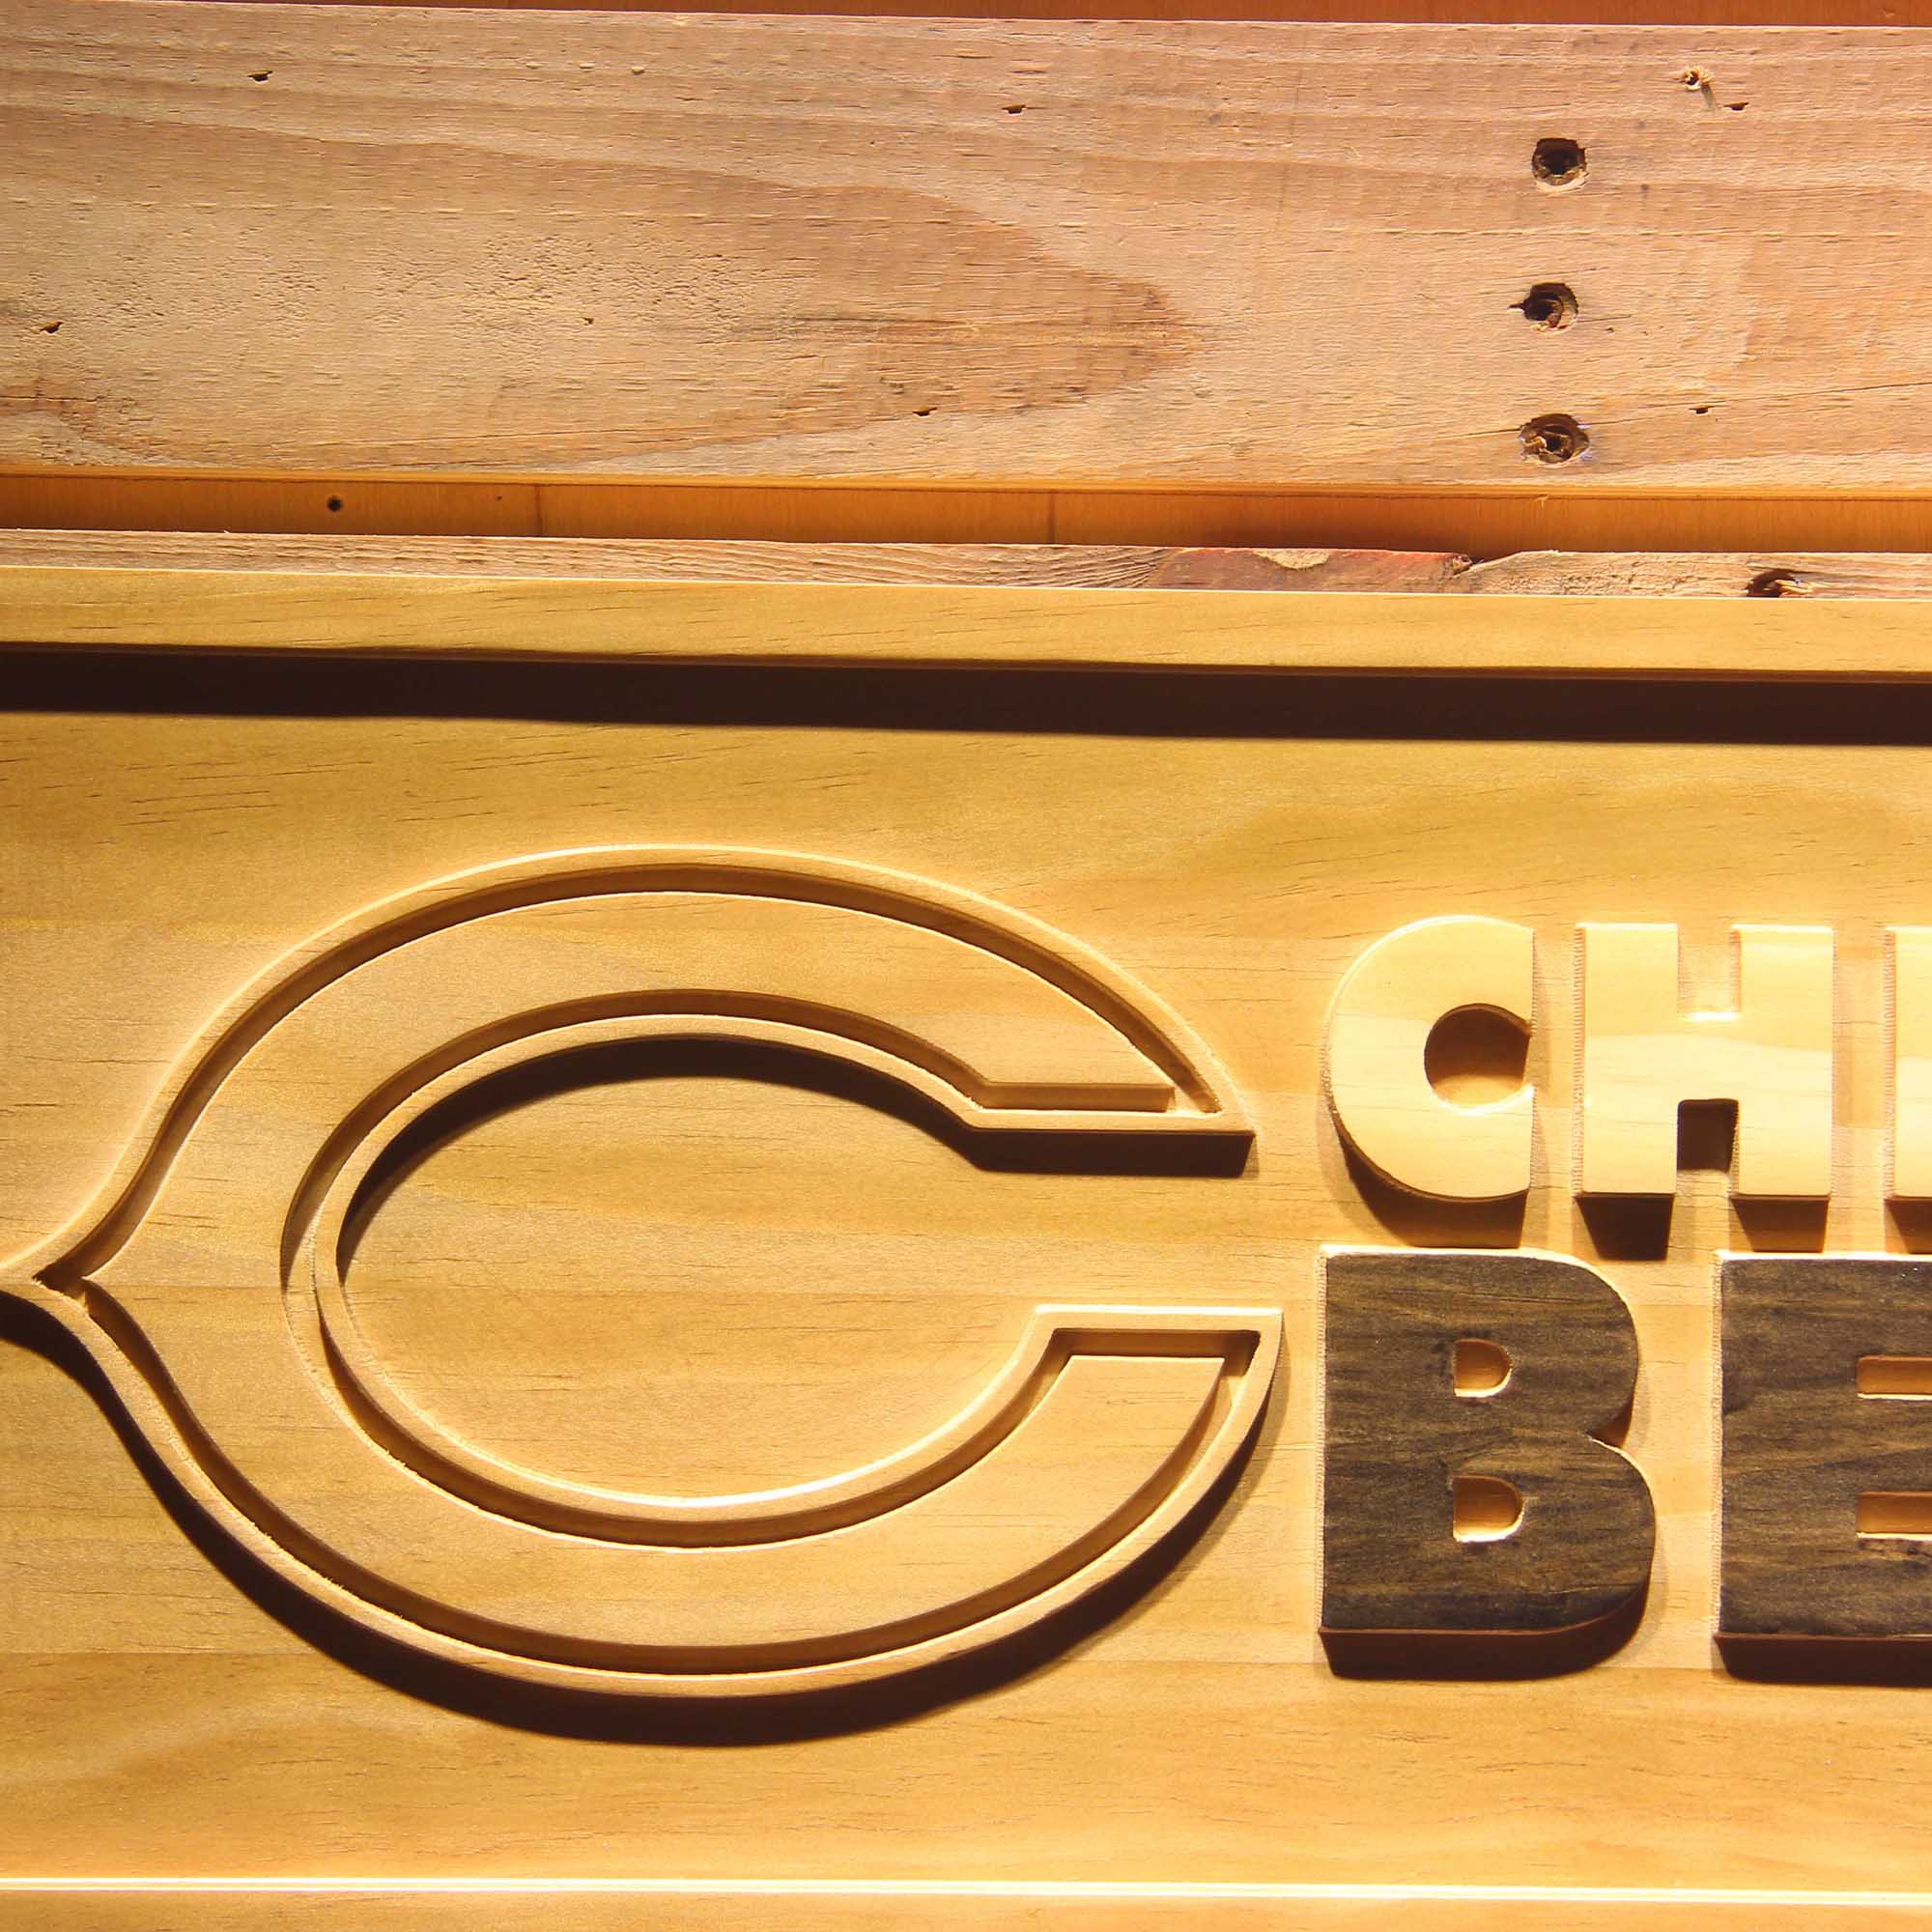 Chicago Bears Football Man Cave Sport 3D Wooden Engrave Sign